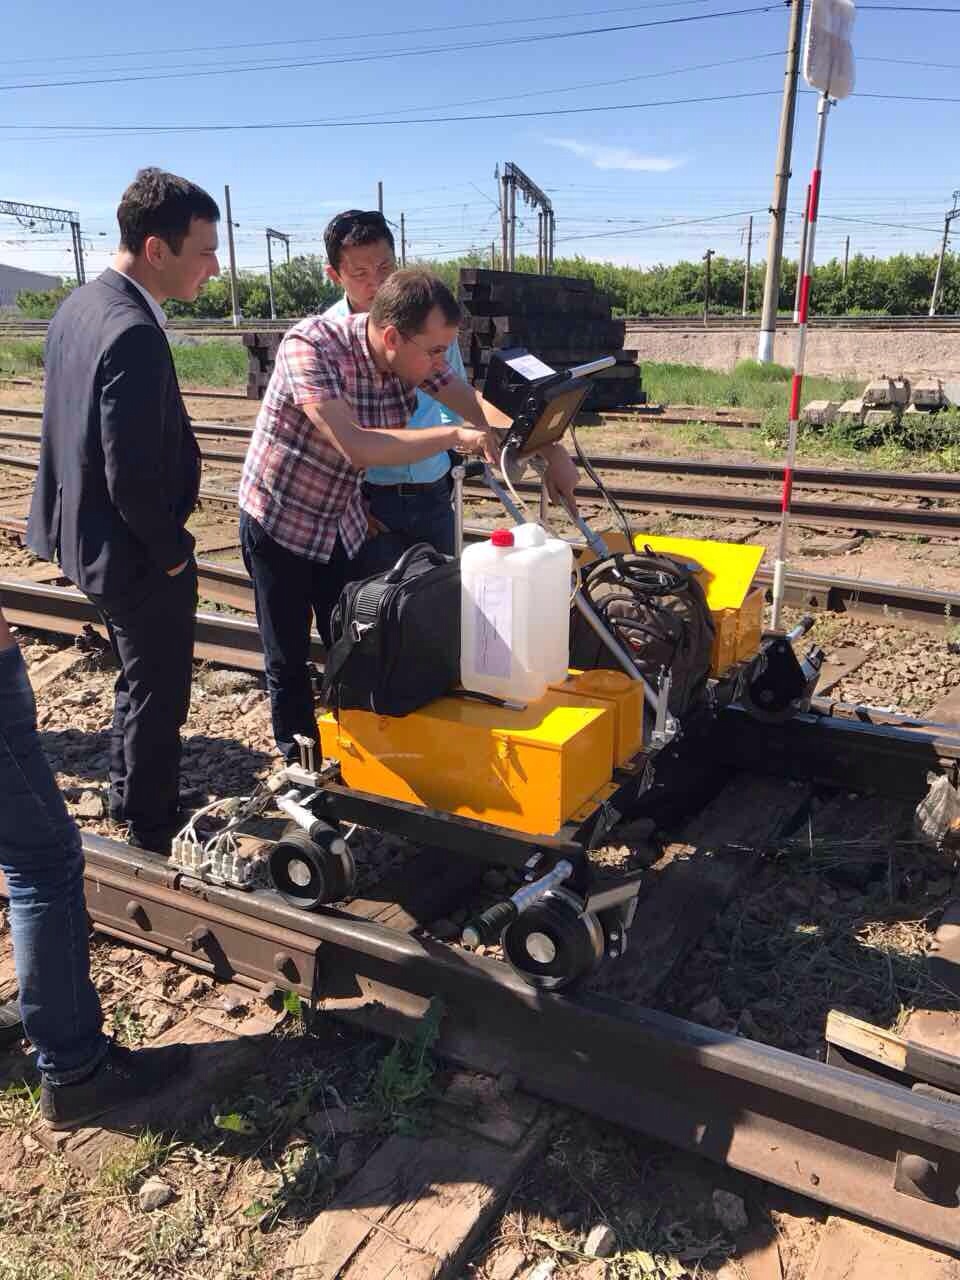 Presentation of the double rail ultrasonic flaw detector UDS2-73 on the railroad track, CIS 2017